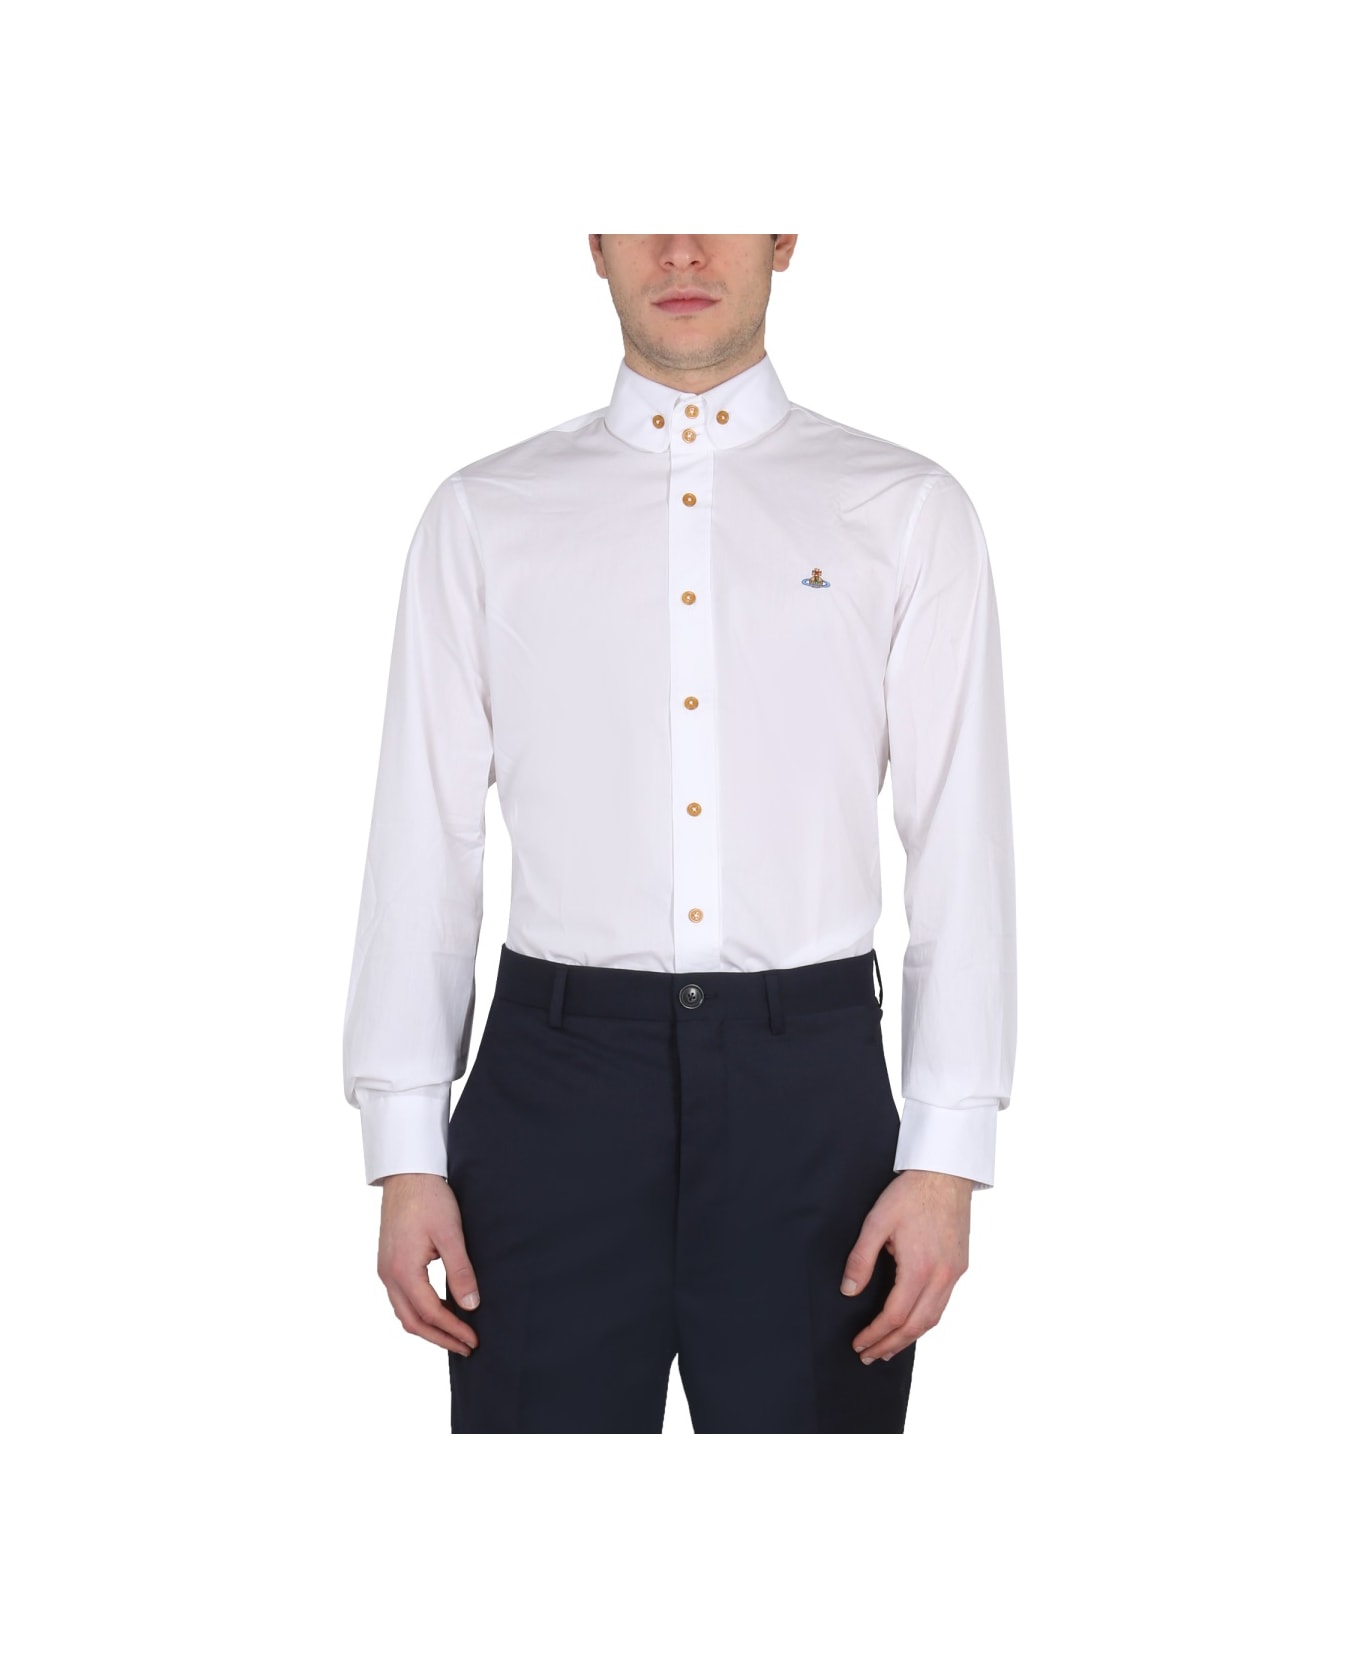 Vivienne Westwood Camicia "krall" - WHITE シャツ